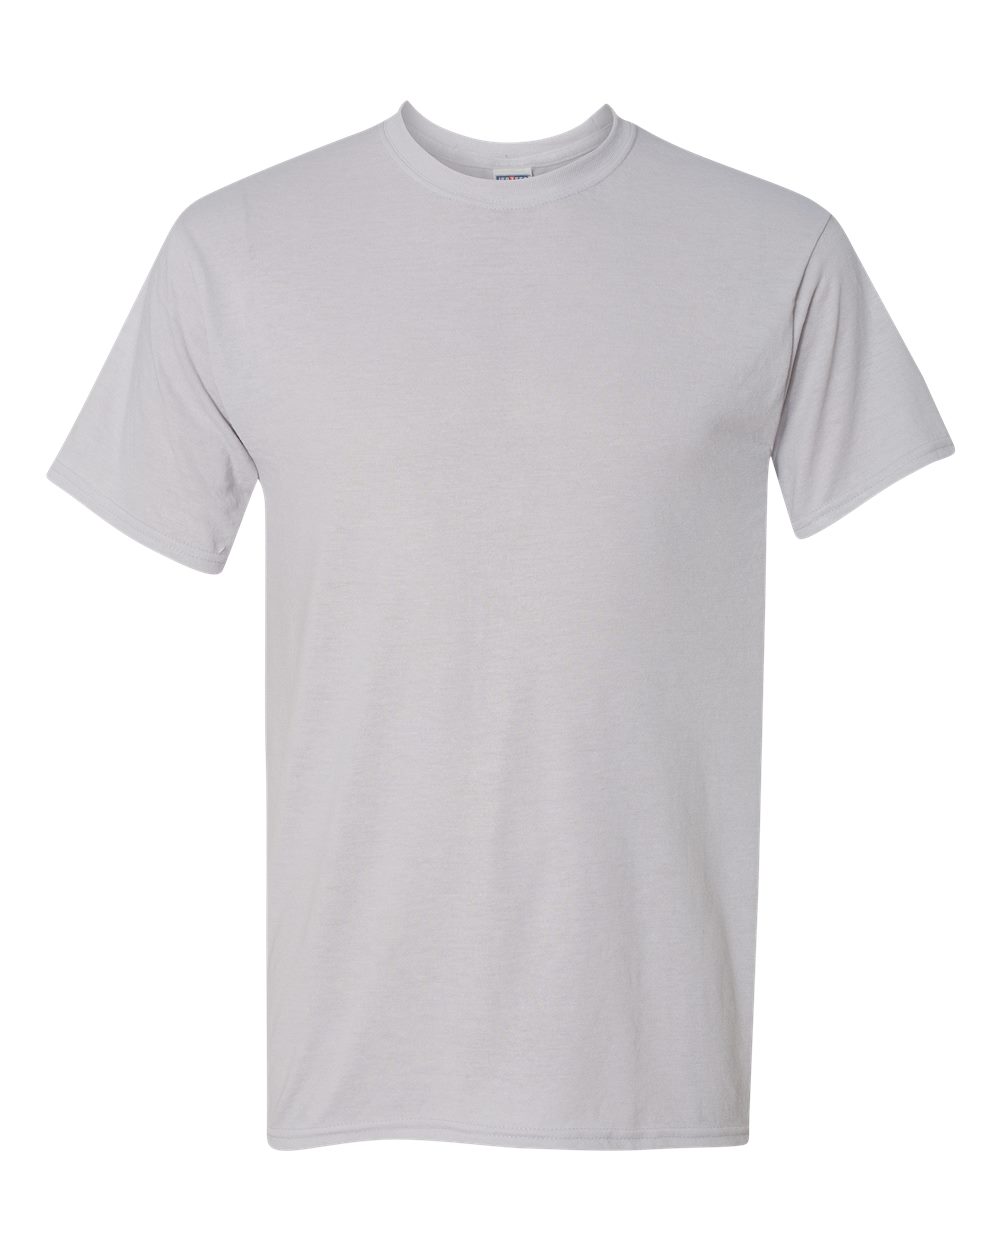 JERZEES - Dri-Power® Performance Short Sleeve Silver T-Shirt - 21MR - BULK SALE - QTY 20 $ 63.00 Ideal for sublimation printing